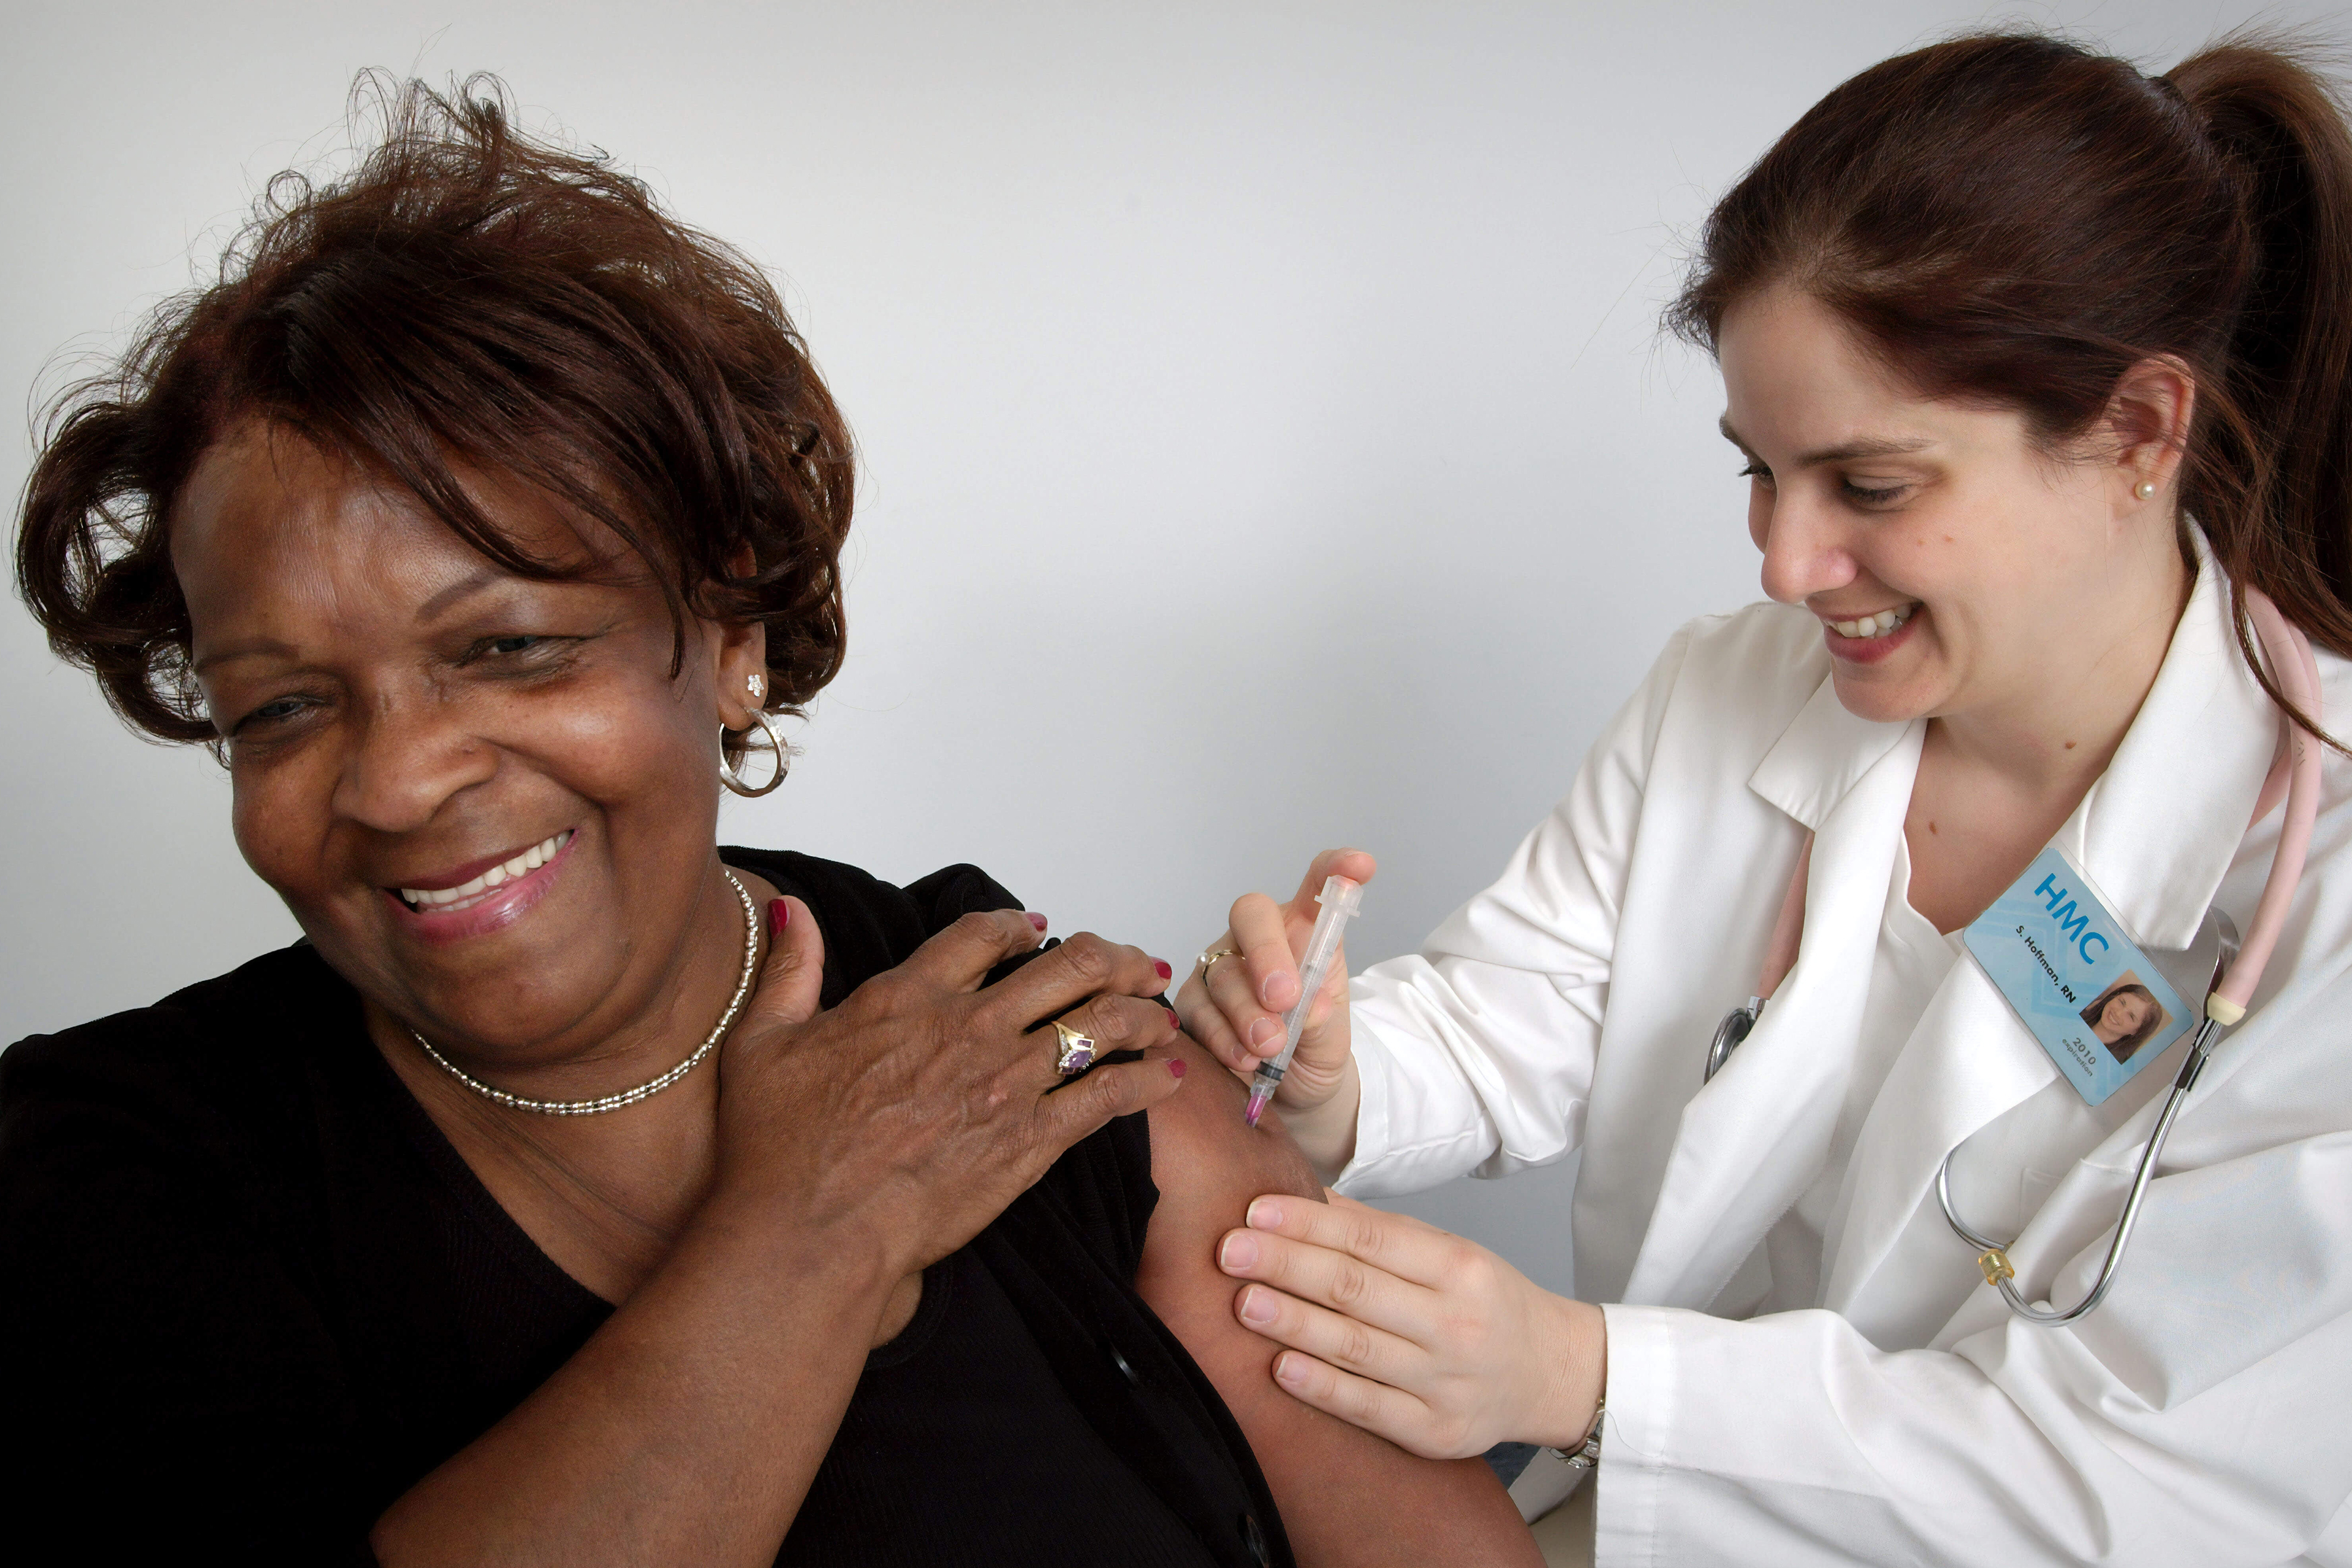 African-American woman receiving a shot from a female doctor